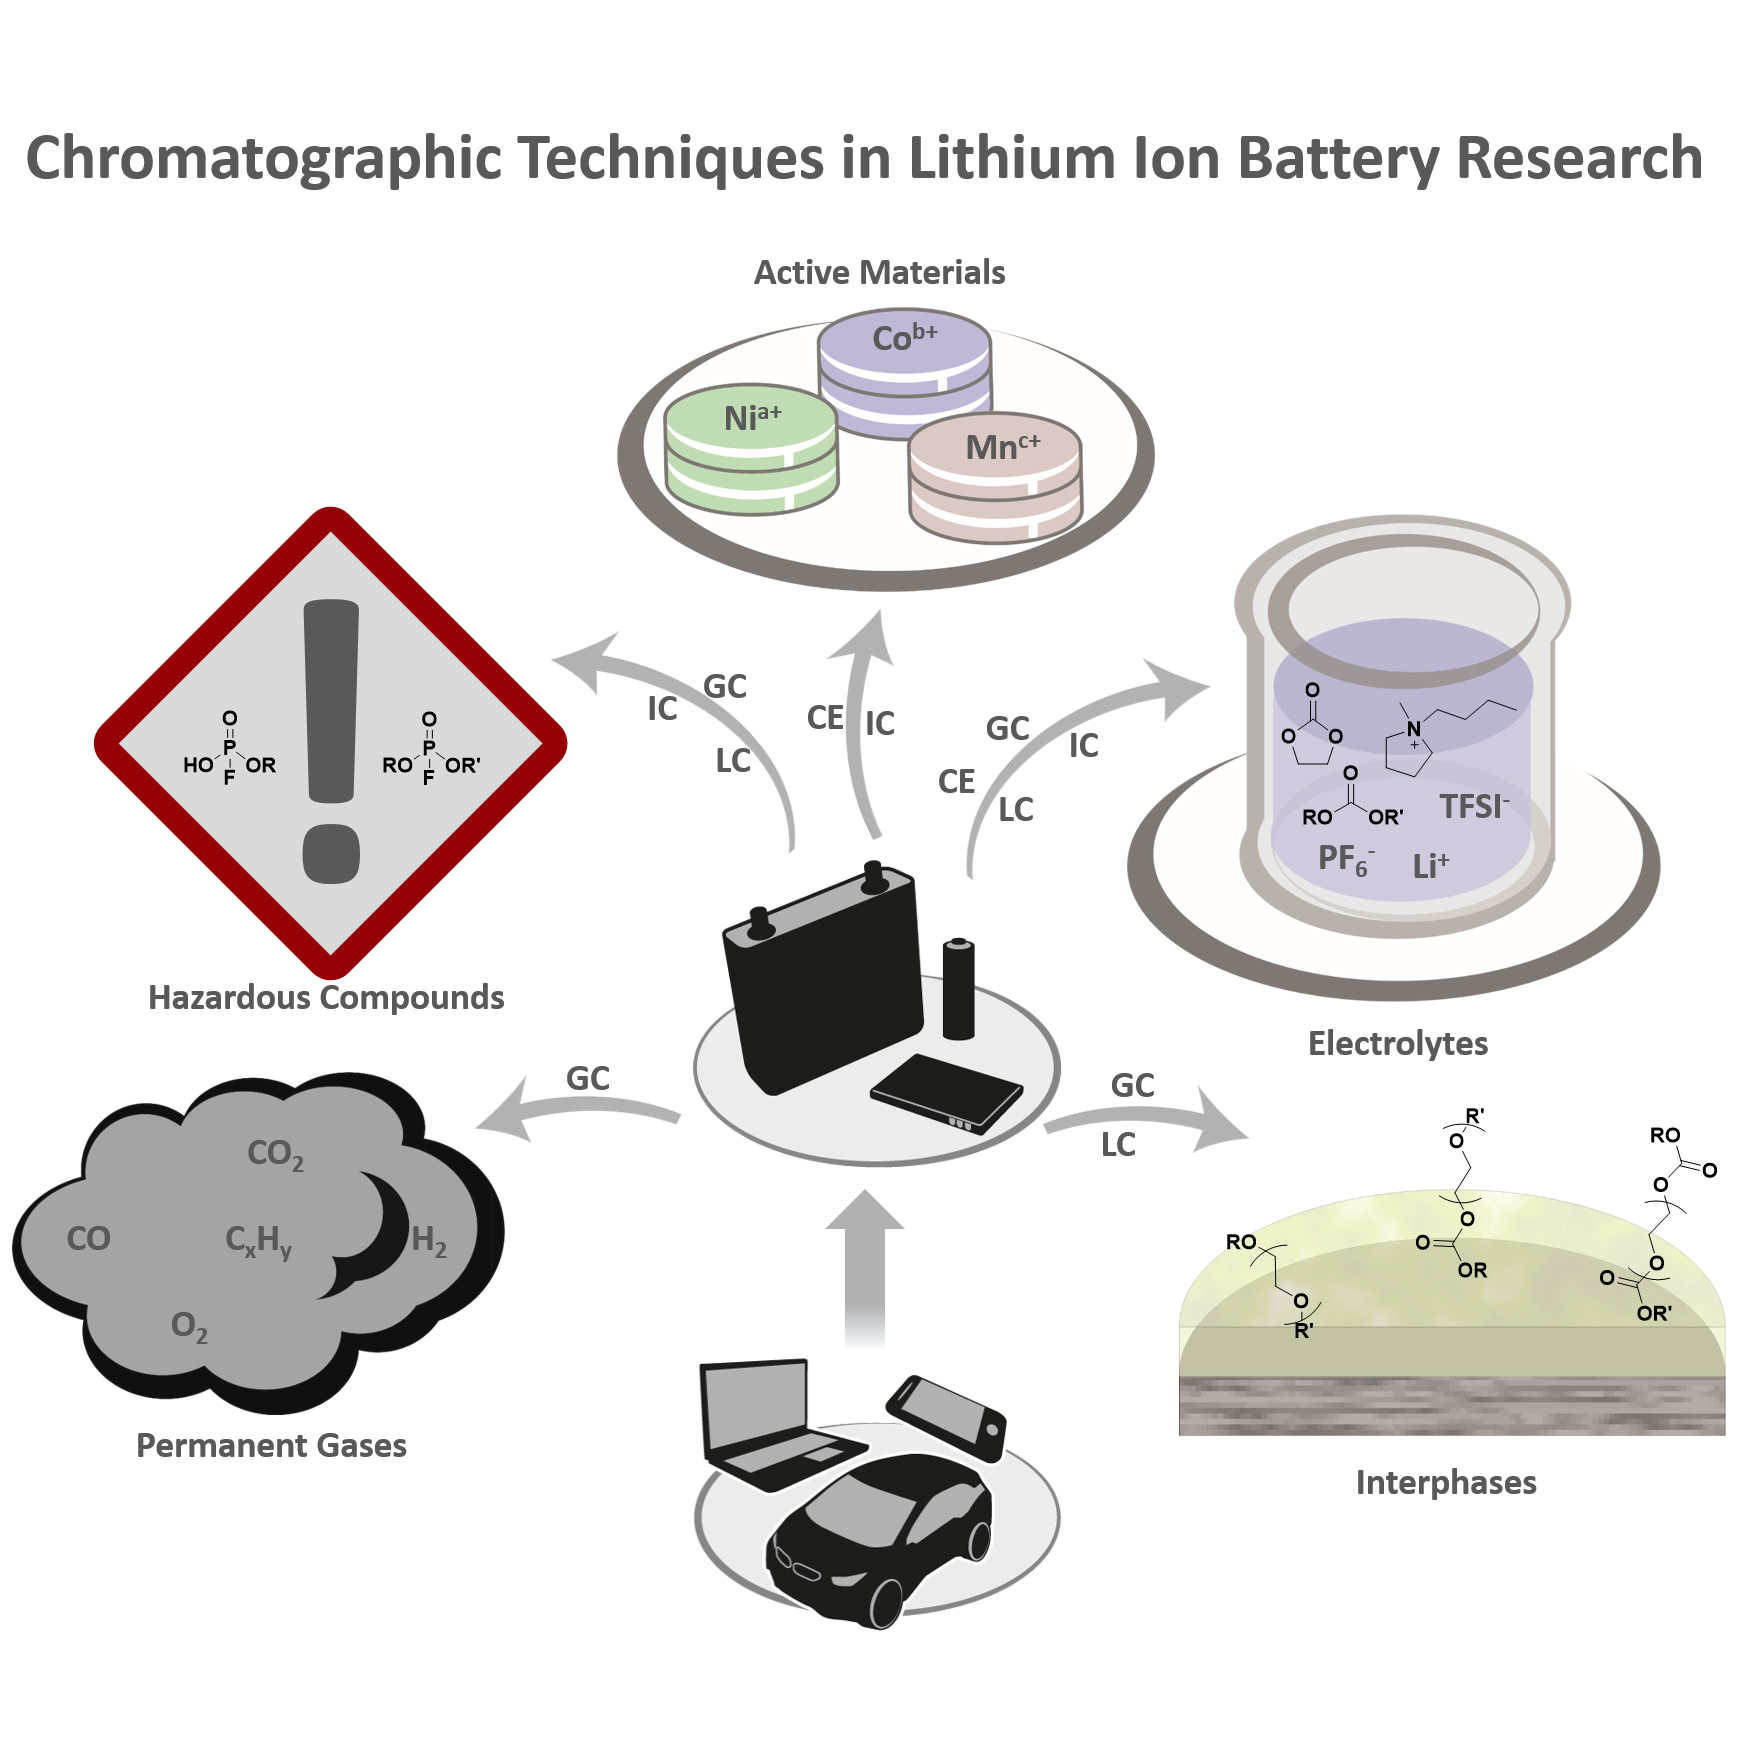 chromatographic methods in lithium ion battery research